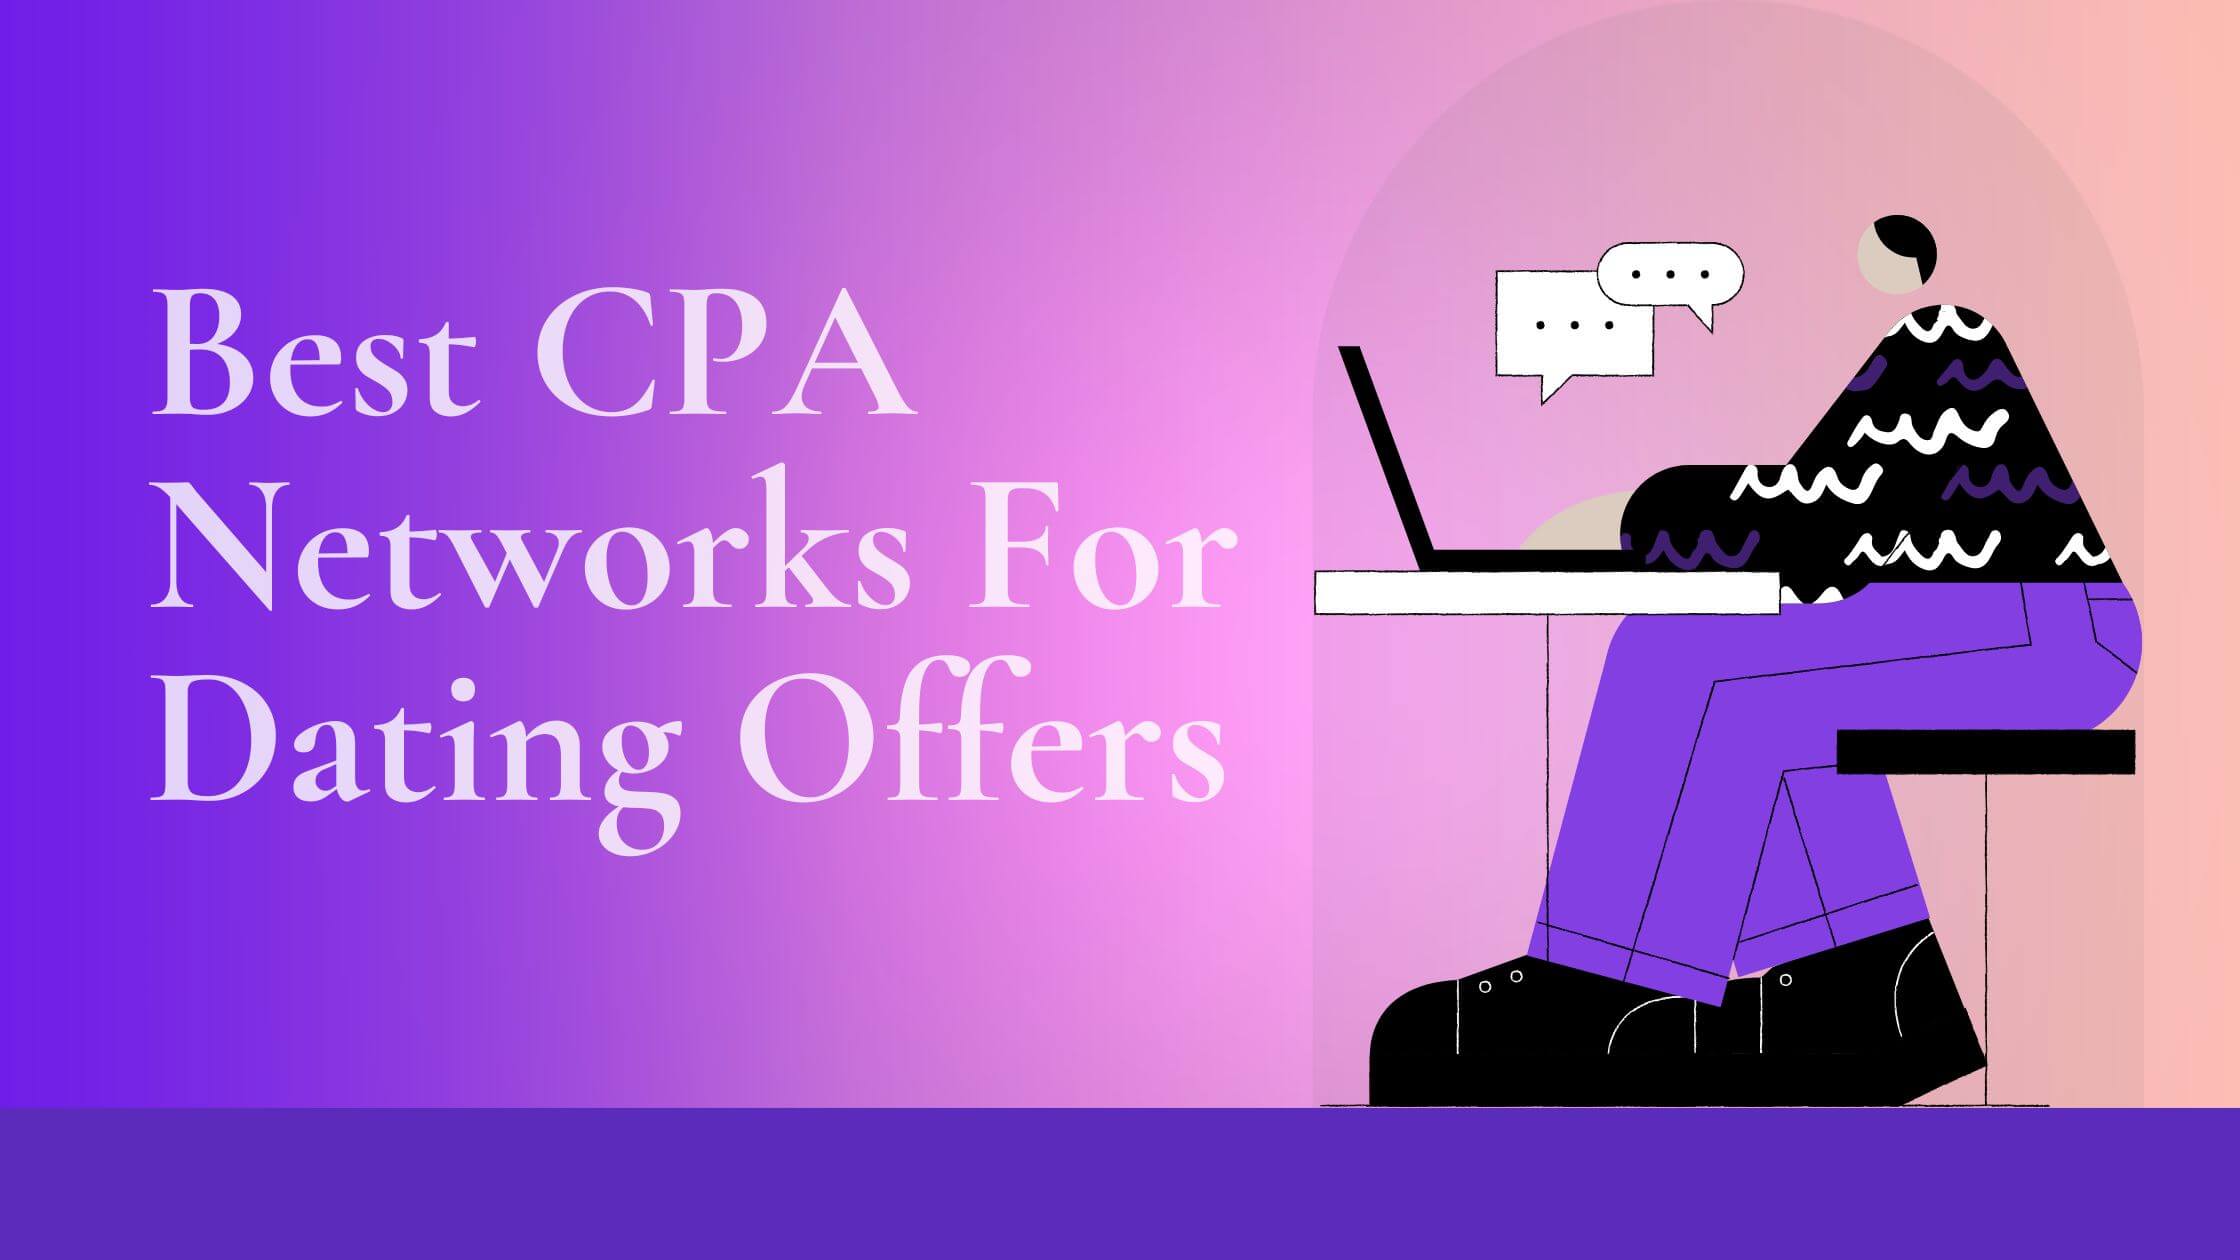 Best CPA Networks For Dating Offers